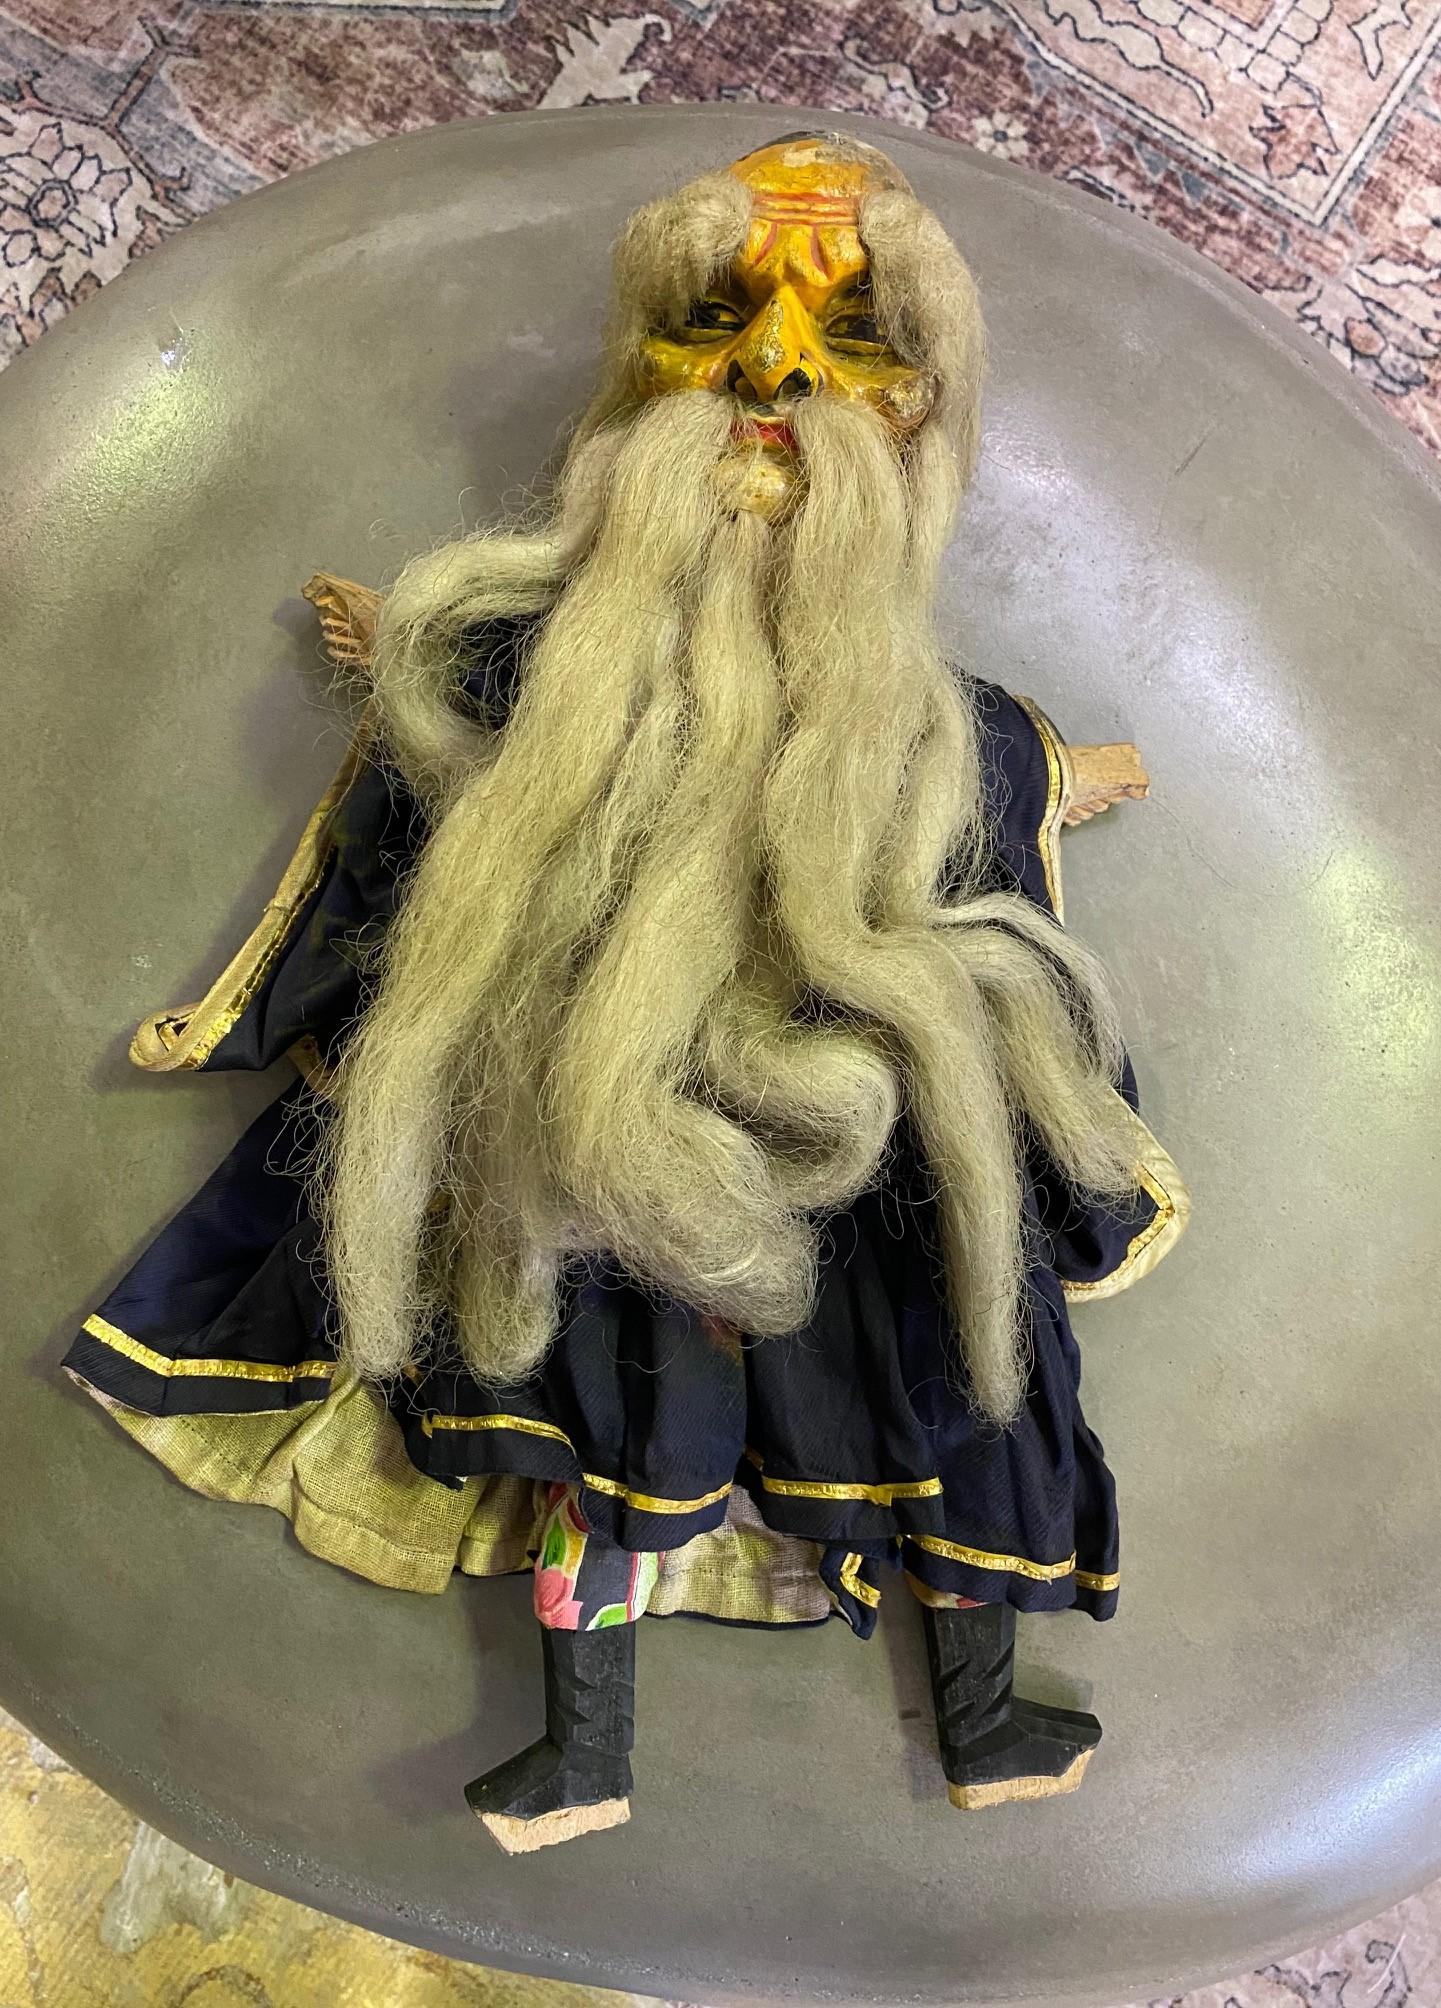 A wonderful work complete with a unique wood-carved and hand-painted face, long grey beard, and original textile garment. 

From a group of 7 Chinese opera puppets, we acquired from a collector. Each puppet shows clear signs of previous stage use.